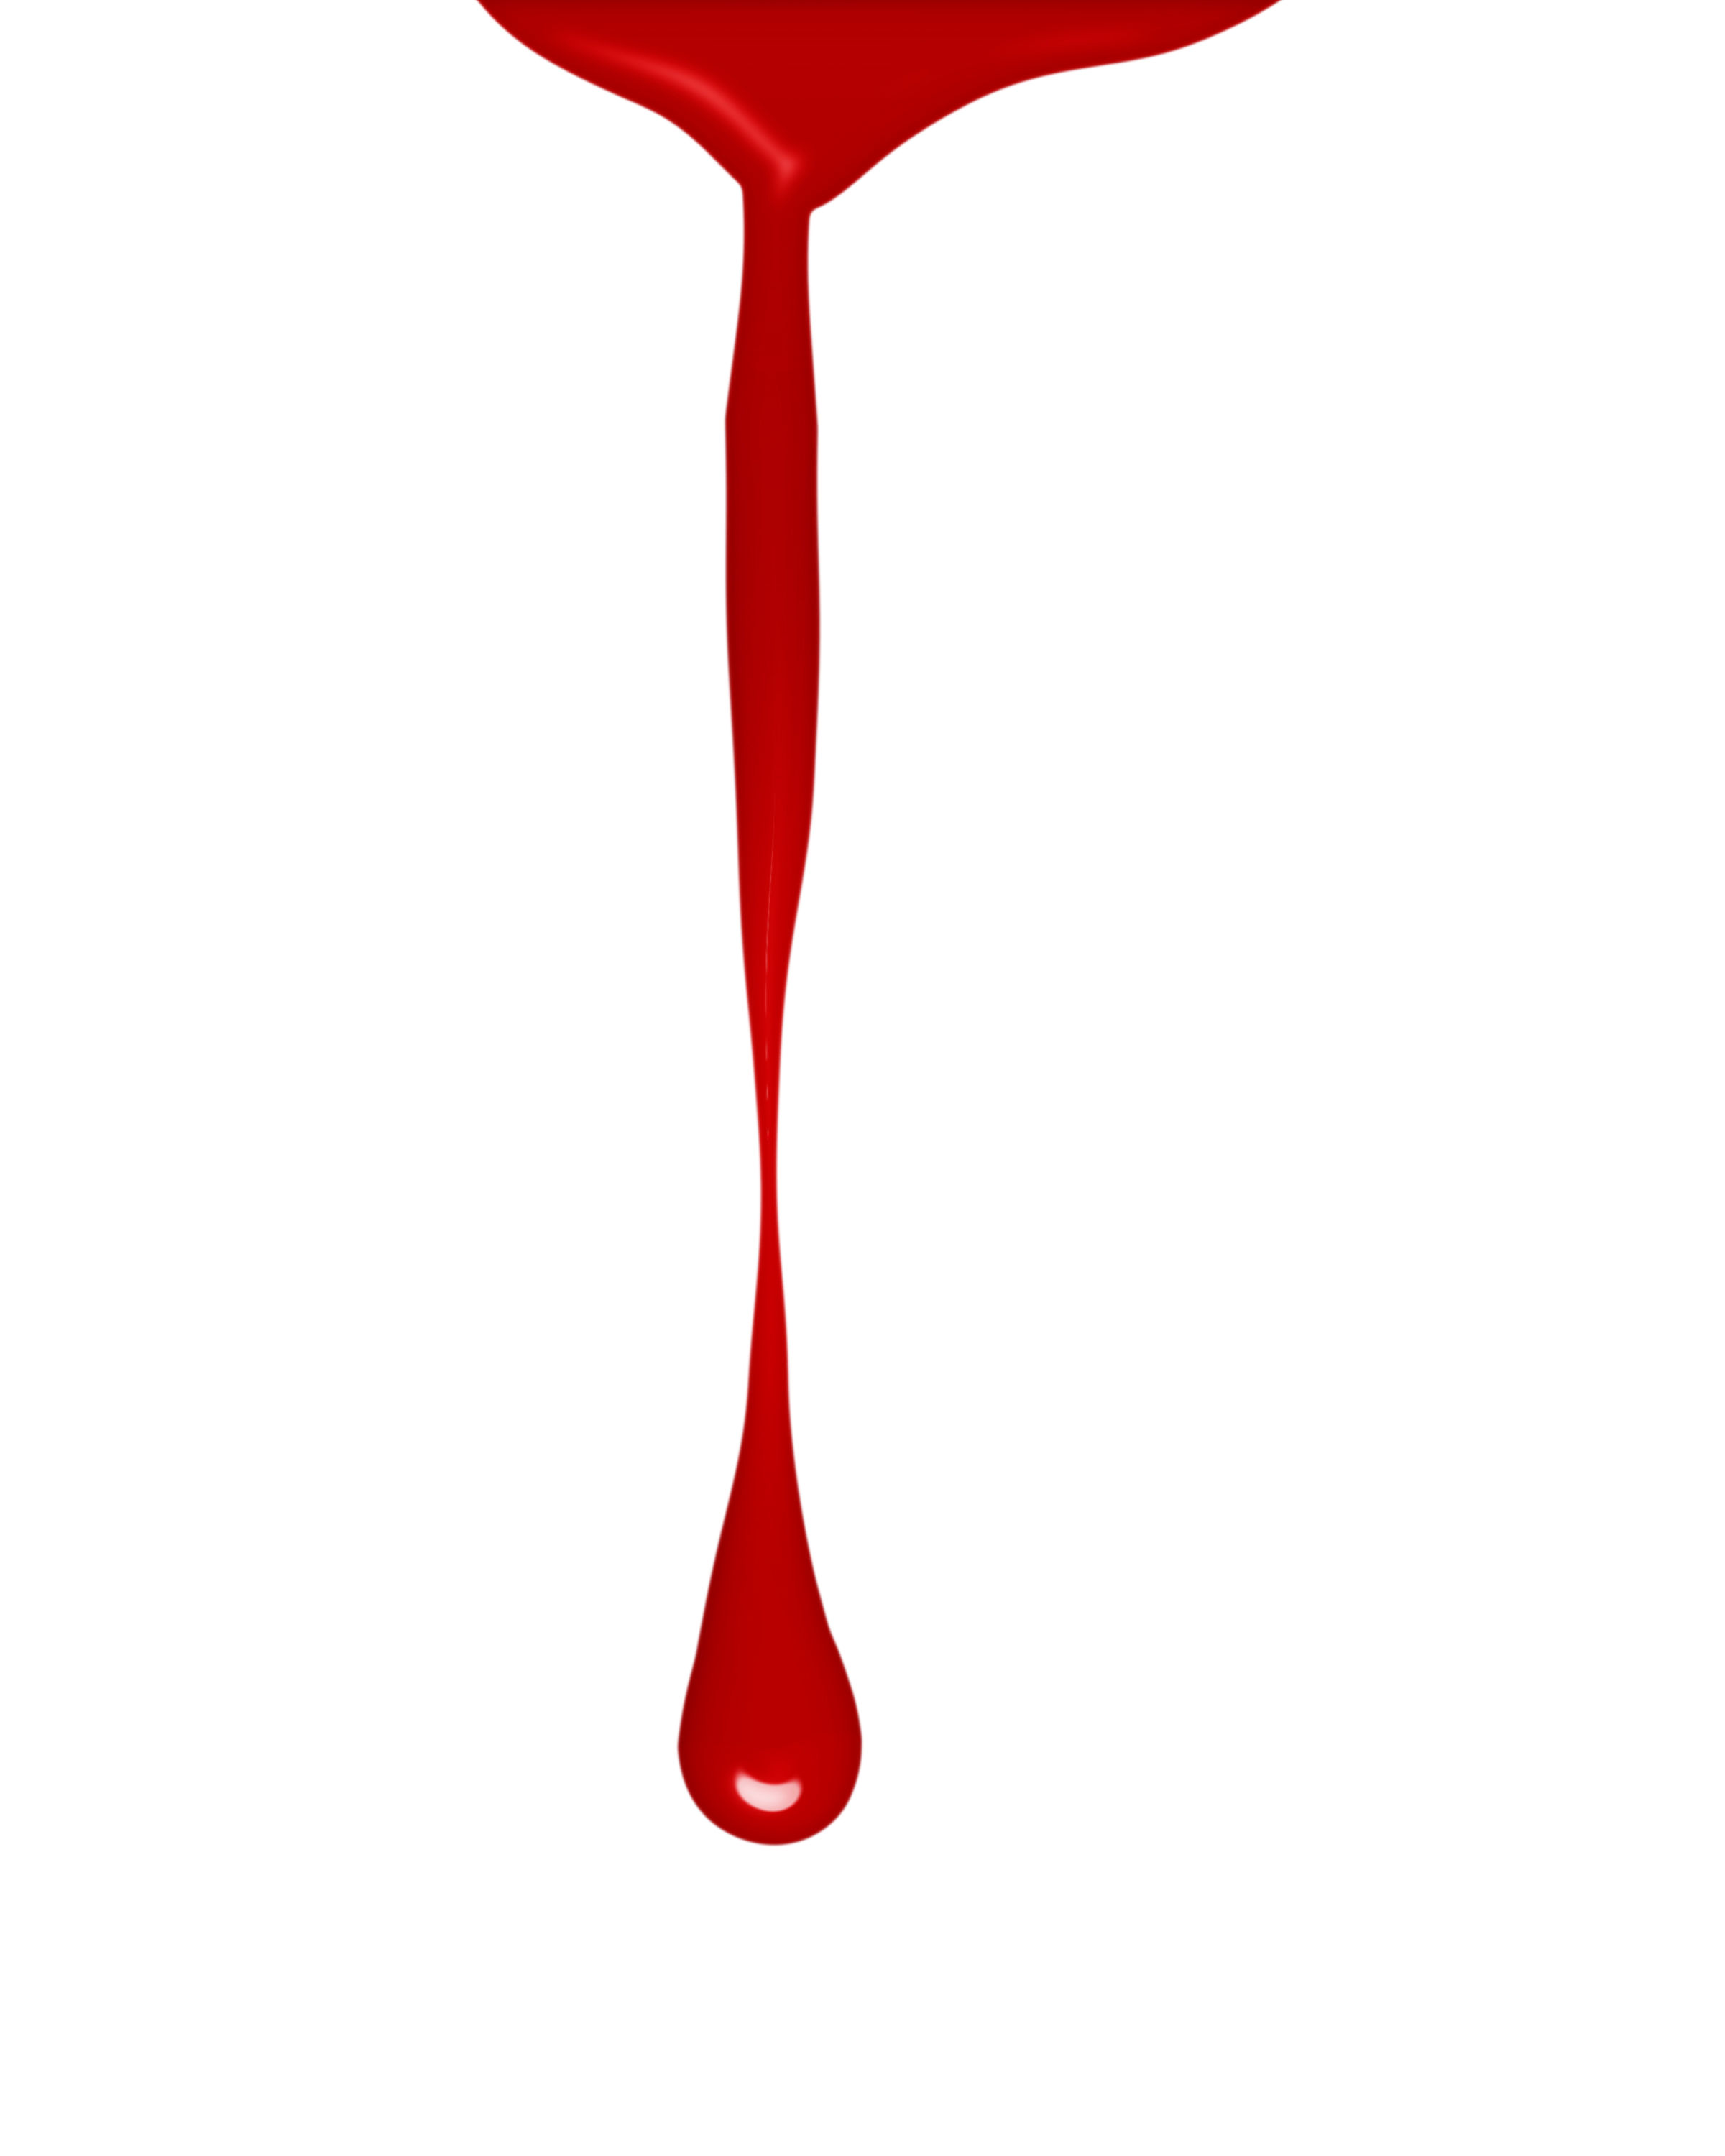 free clipart blood droplet - photo #49